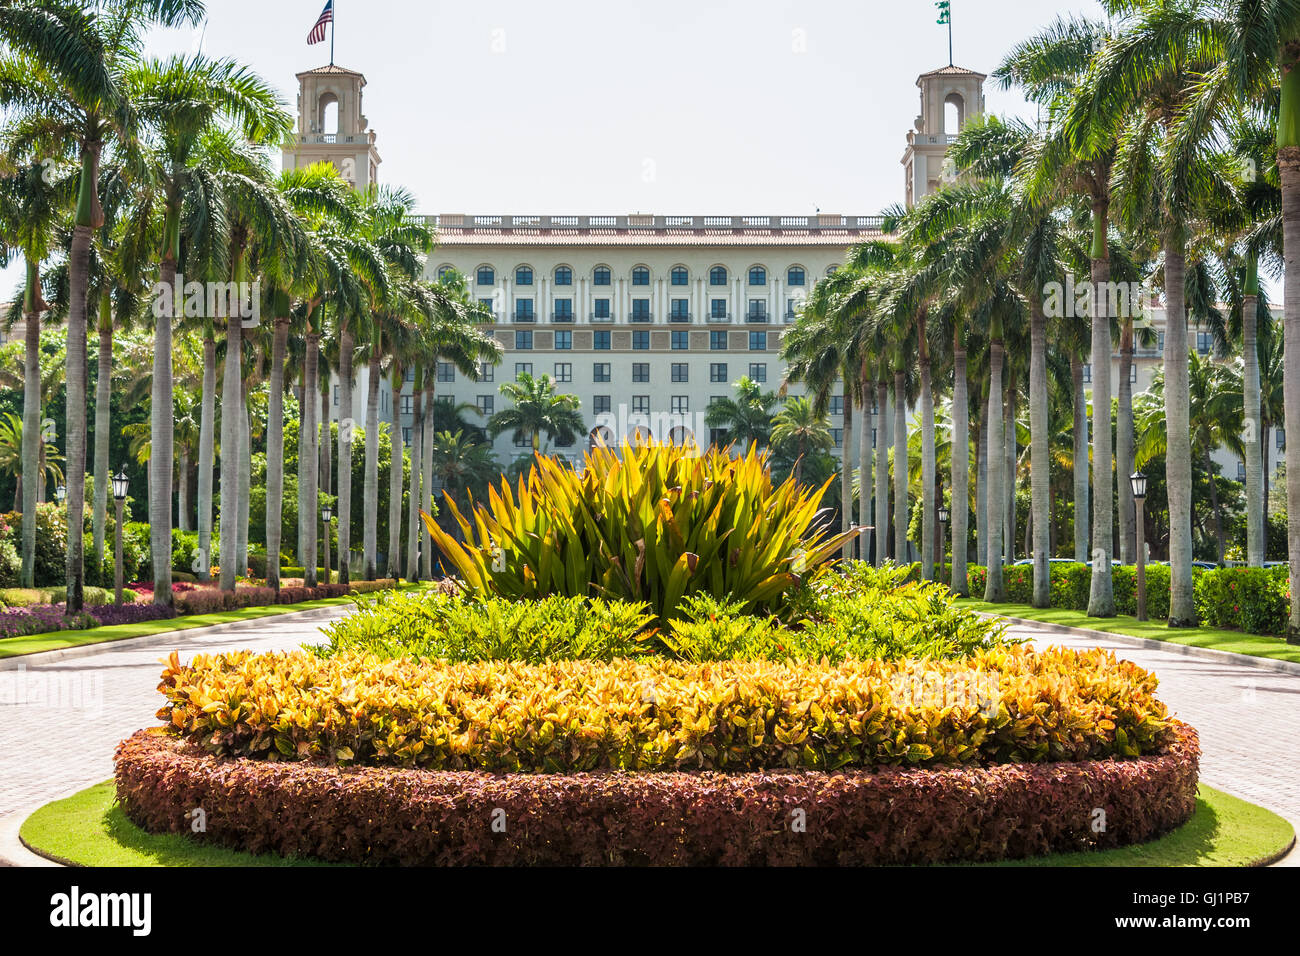 Royal Palm Allee Eingang zum The Breakers Resort in Palm Beach, Florida, USA. Stockfoto